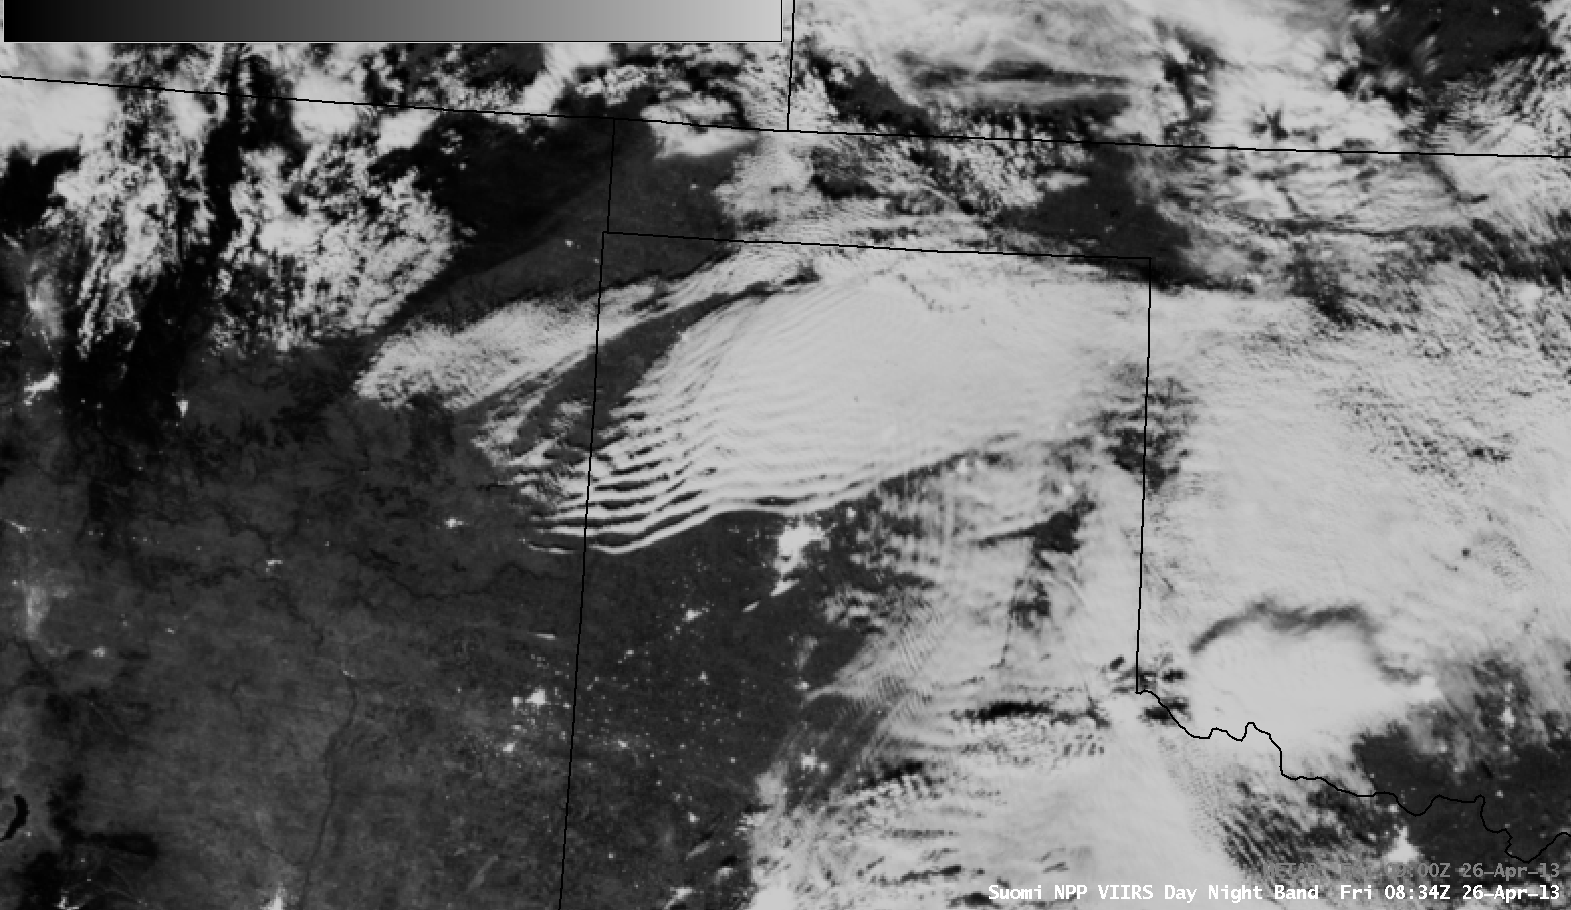 Suomi NPP VIIRS 0.7 Âµm Day/Night Band image with METAR surface reports